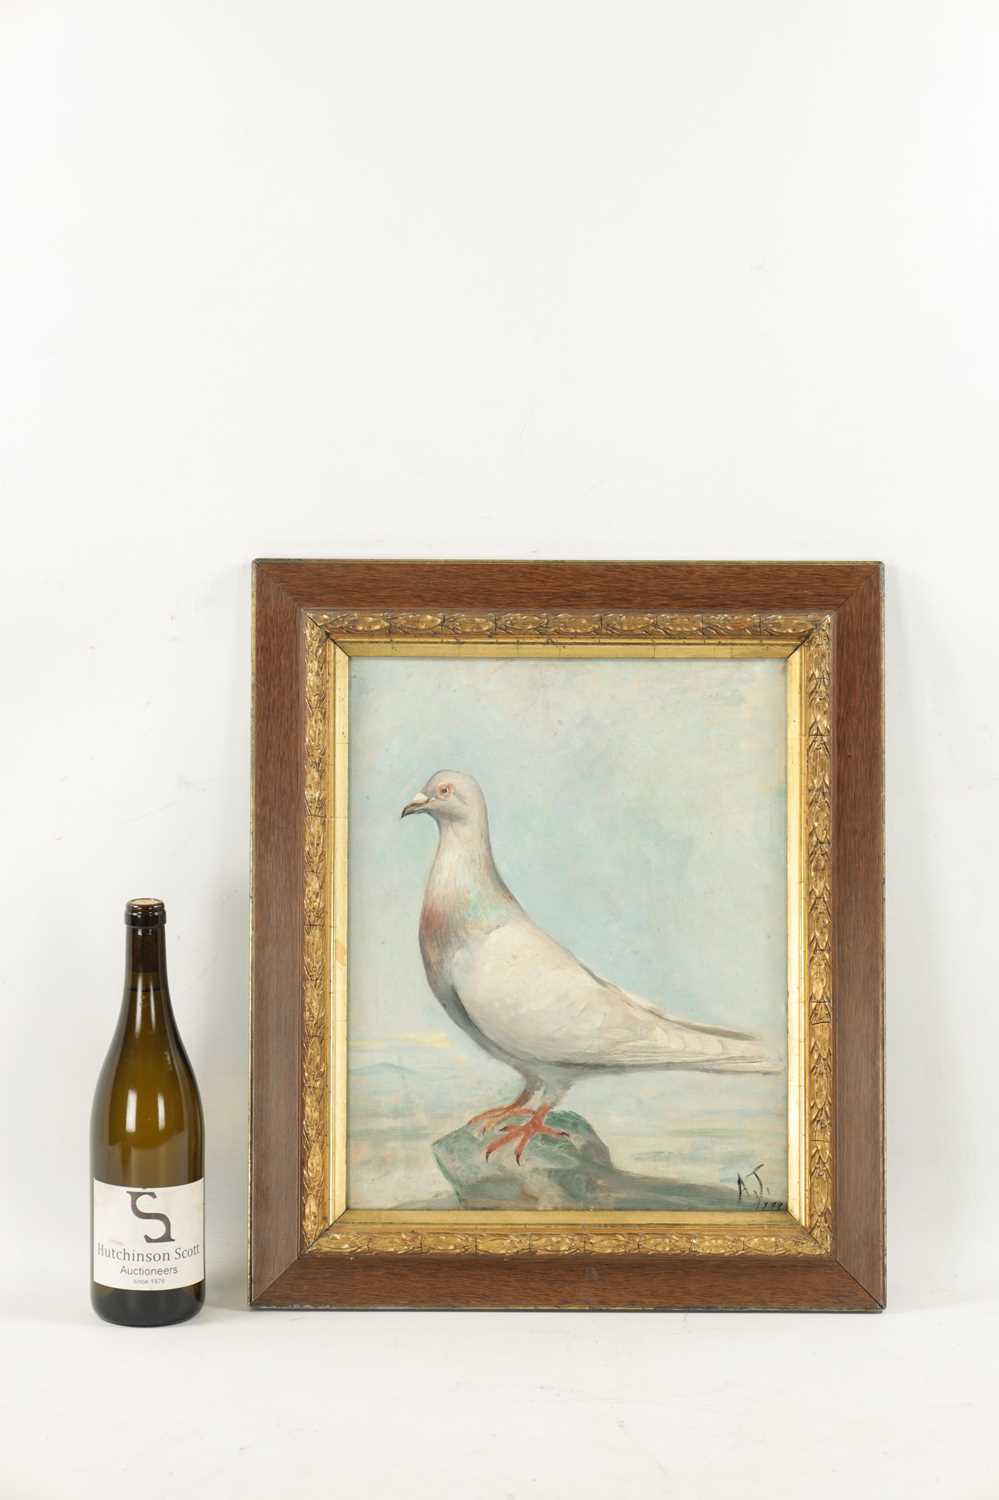 A 19TH CENTURY OIL ON CANVAS PORTRAIT OF A RACING PIGEON - Image 4 of 5